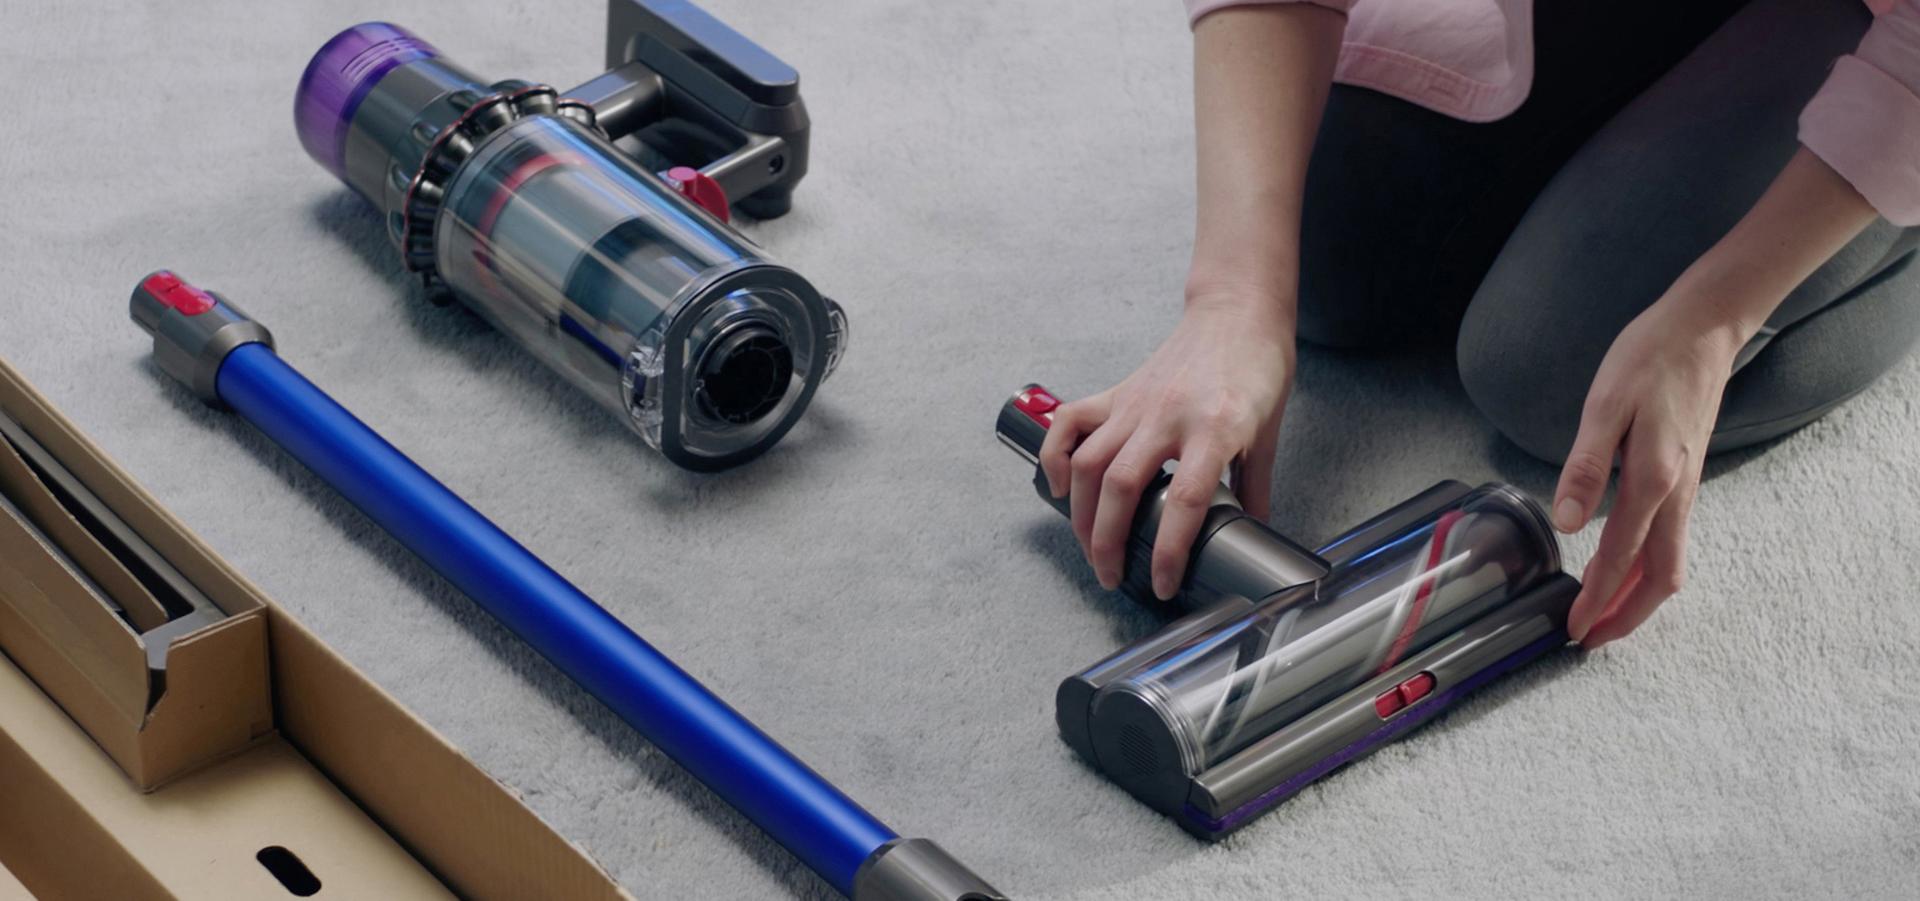 Dyson Outsize vacuum being assembled on the floor.